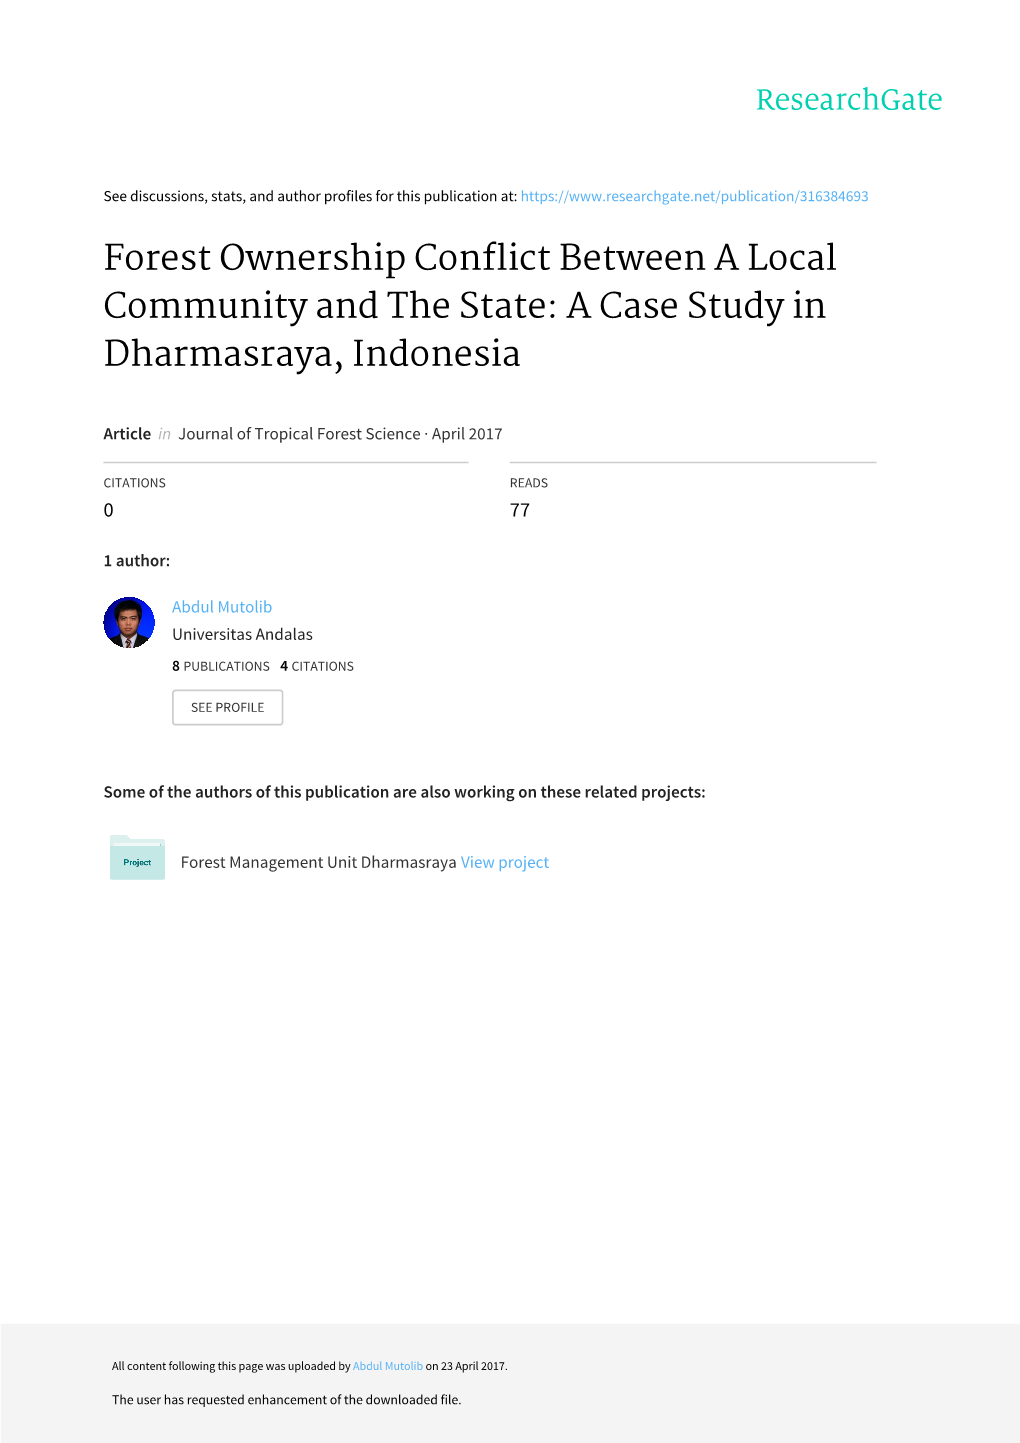 Forest Ownership Conflict Between a Local Community and the State: a Case Study in Dharmasraya, Indonesia